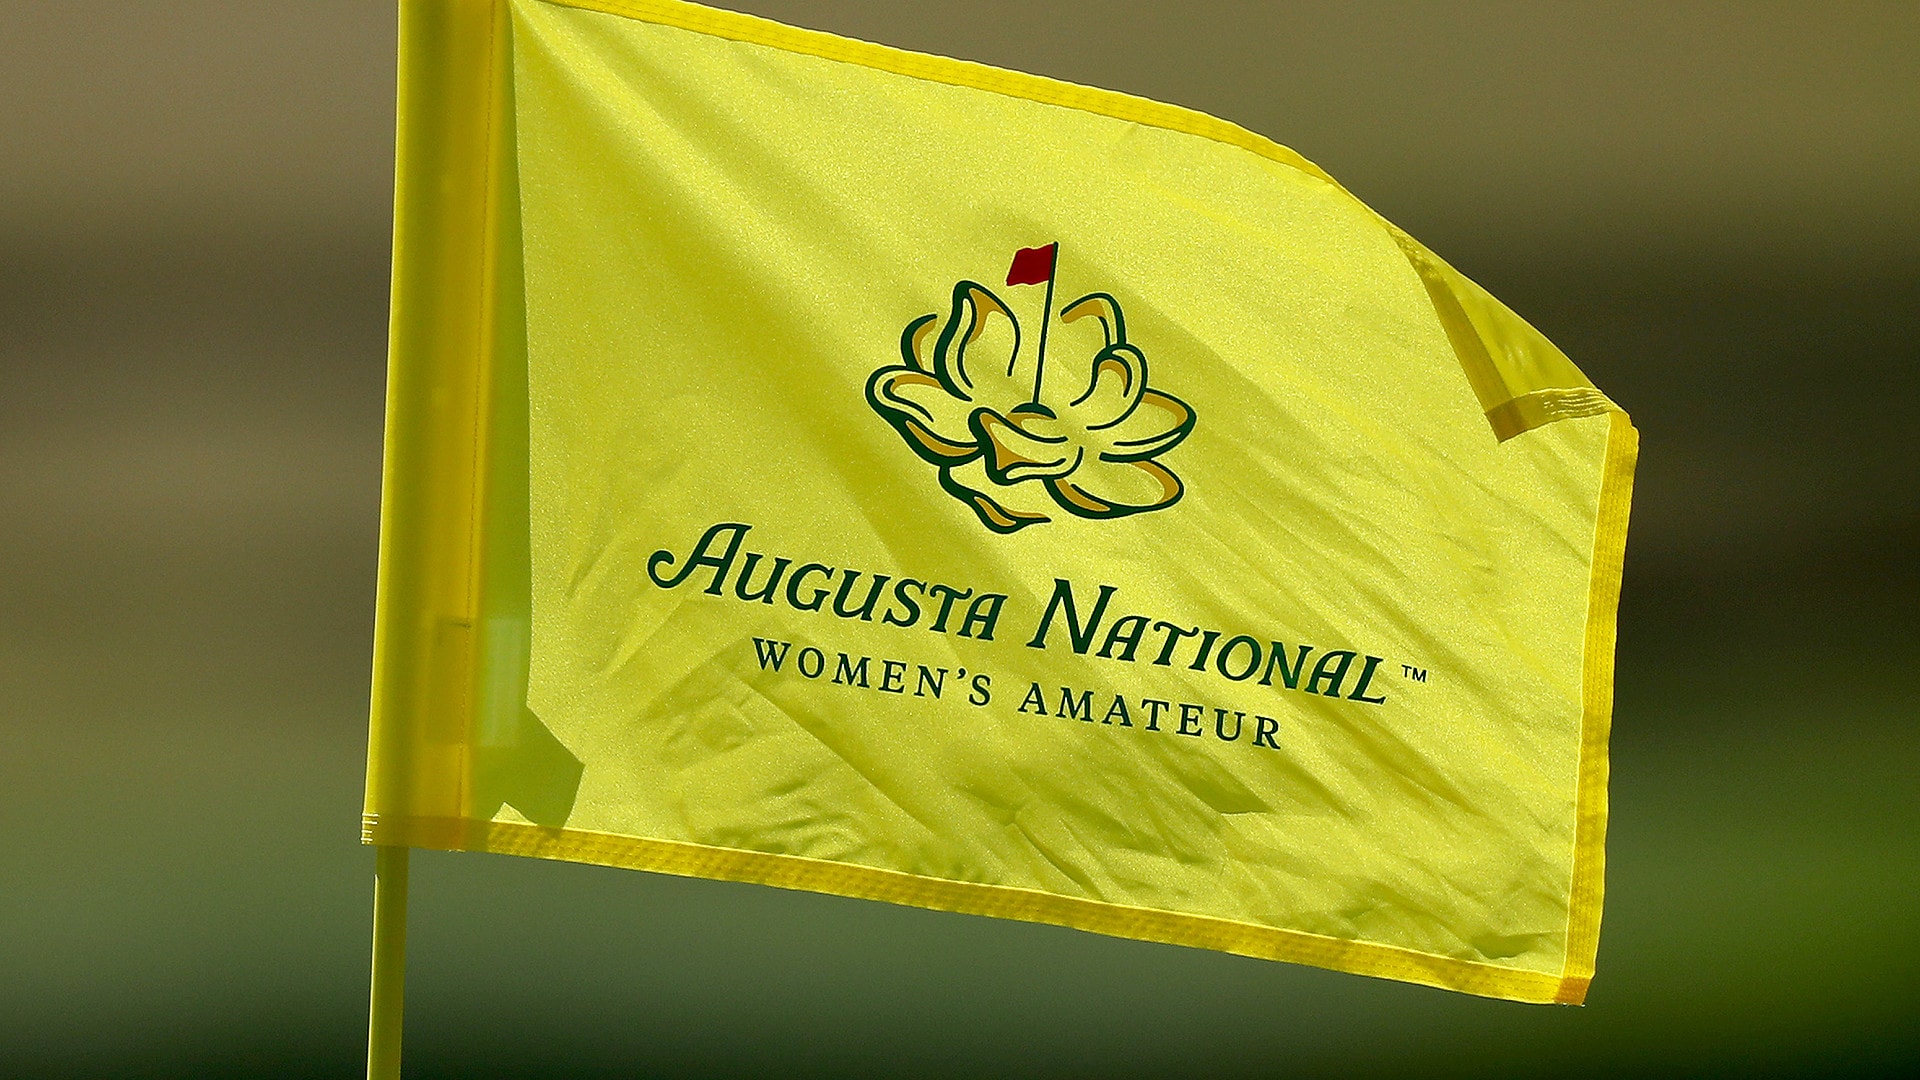 Nebraska’s Kate Smith leads as rain suspends play on Day 1 of Augusta National Women’s Amateur